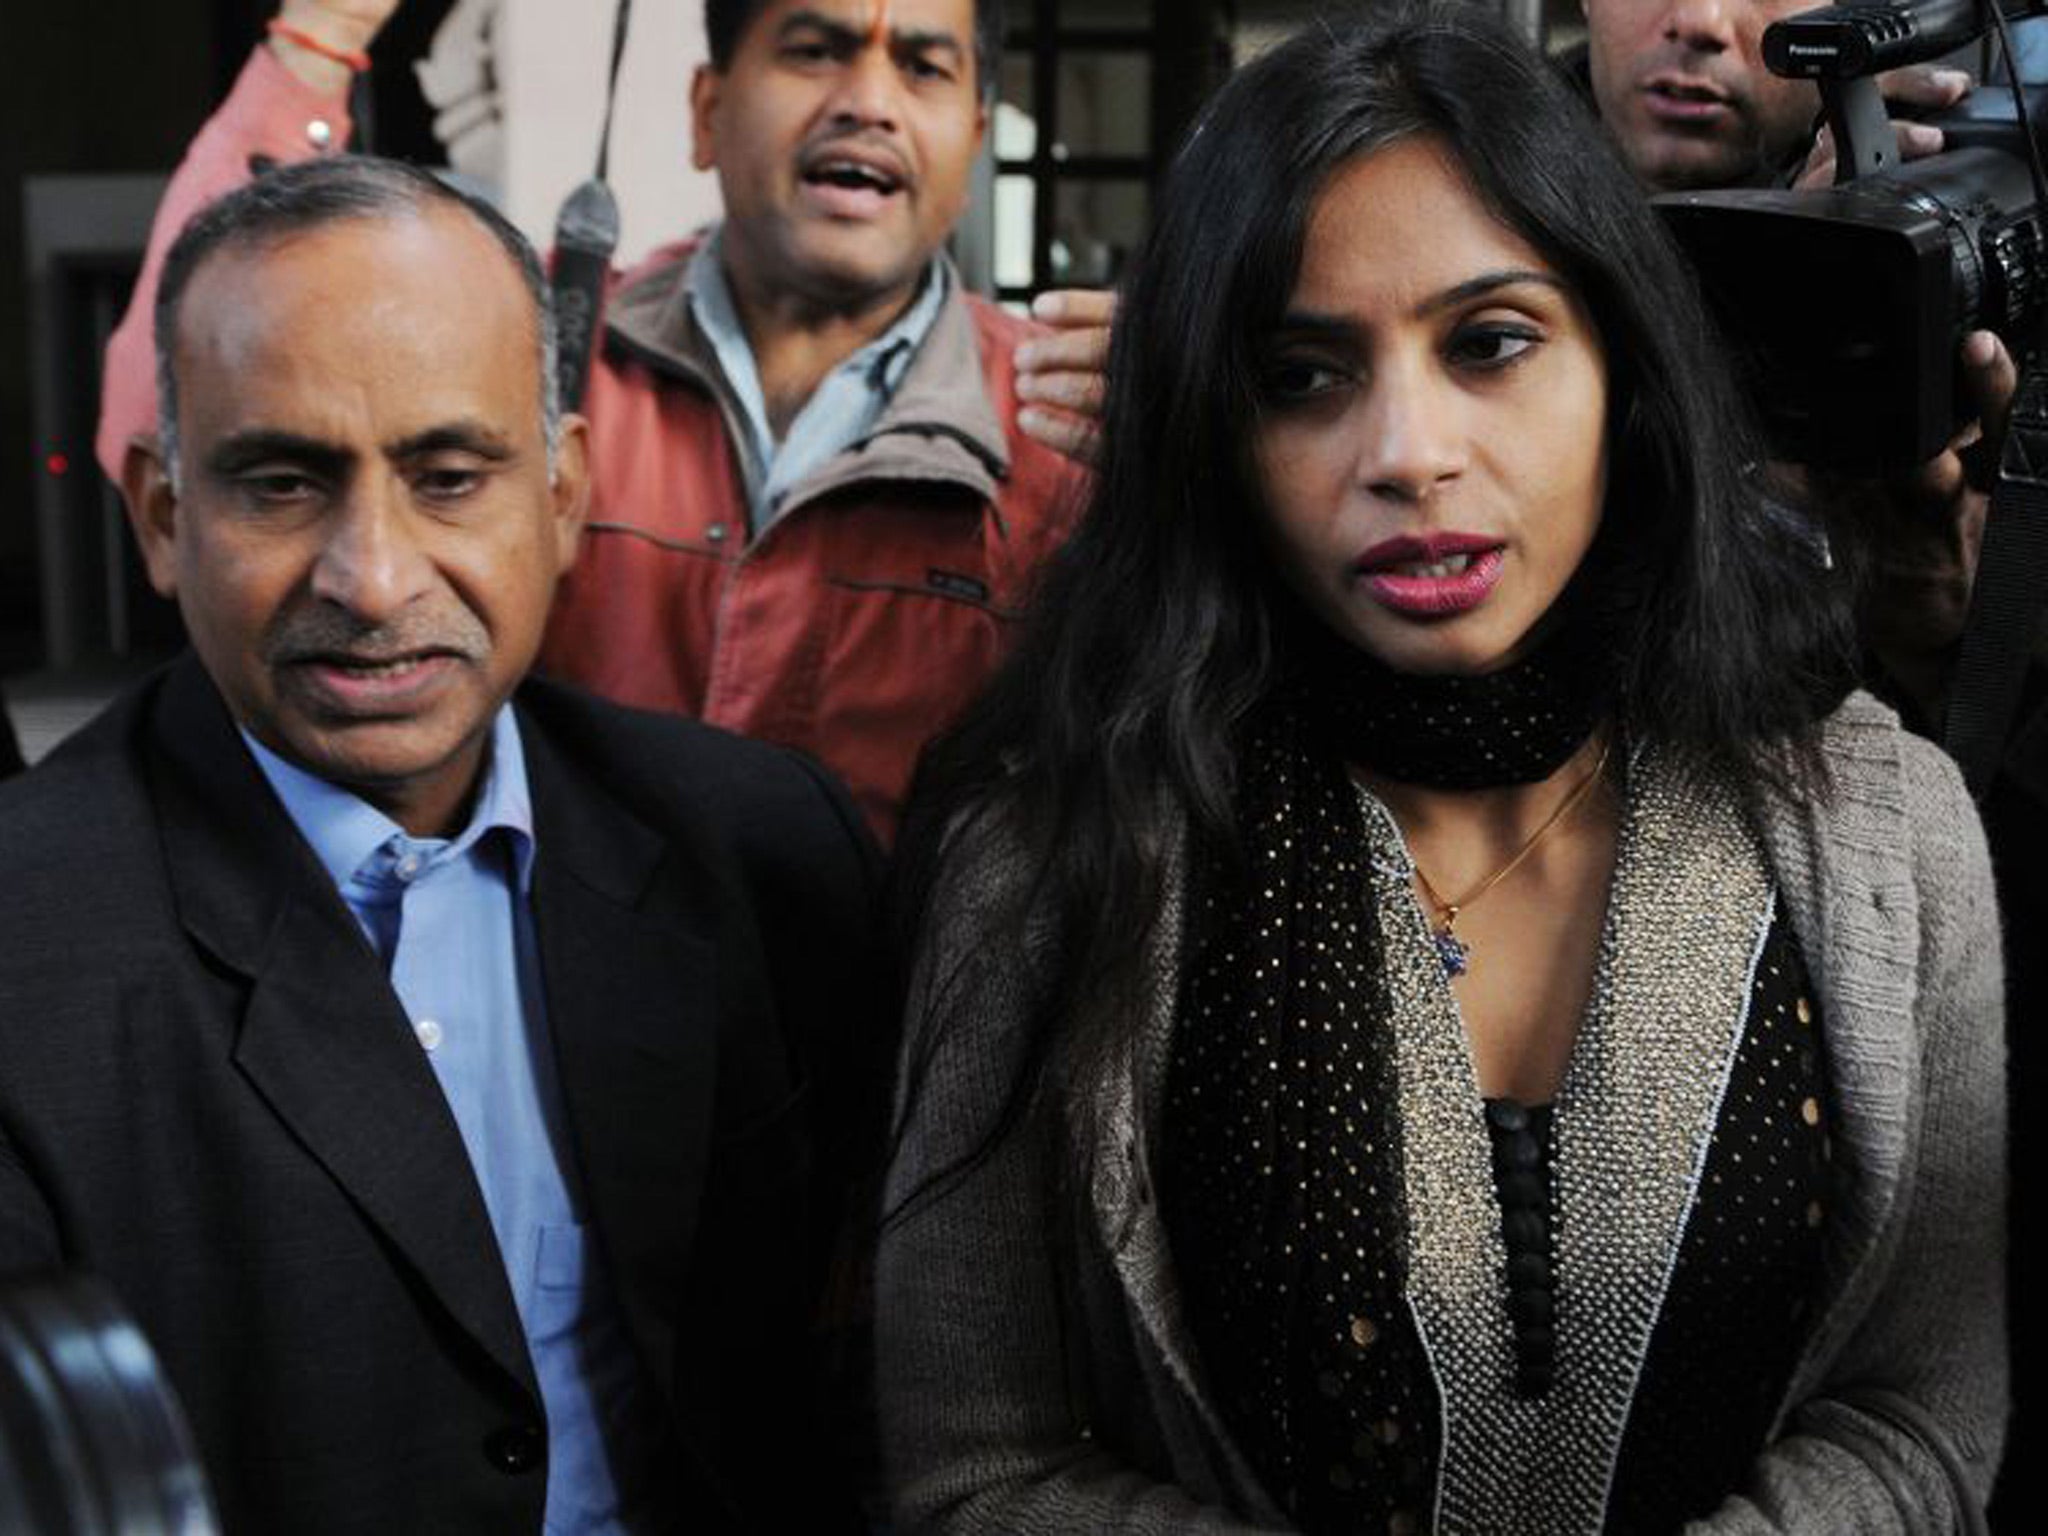 Devayani Sex Devayani Sex - Indian diplomat Devyani Khobragade arrives in Delhi from US: Deal reached  after rift over arrest and strip-search | The Independent | The Independent